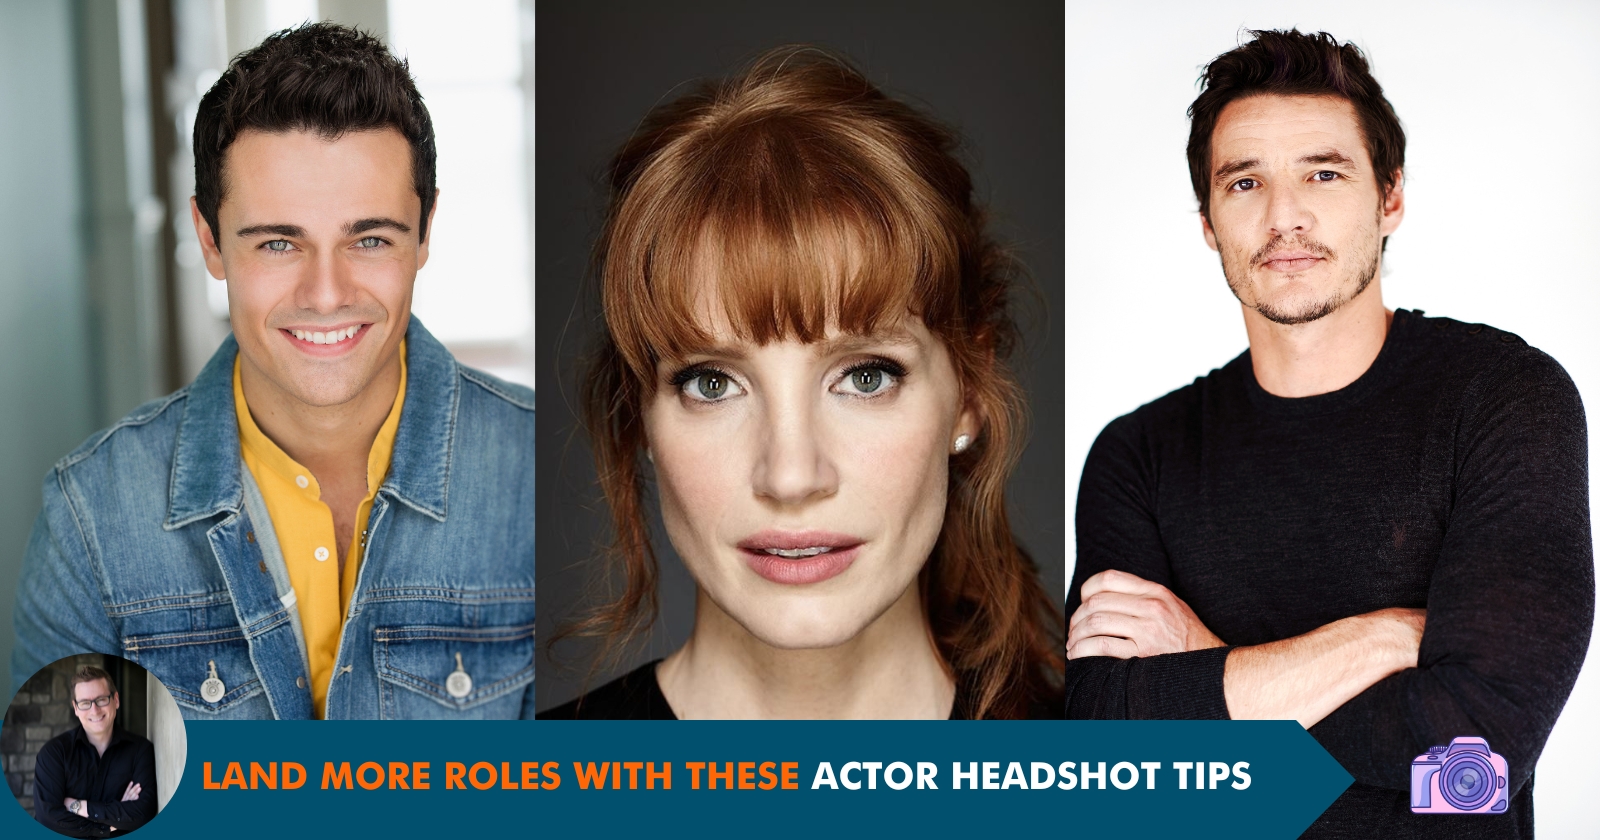 Land More Roles With These Actor Headshot Tips